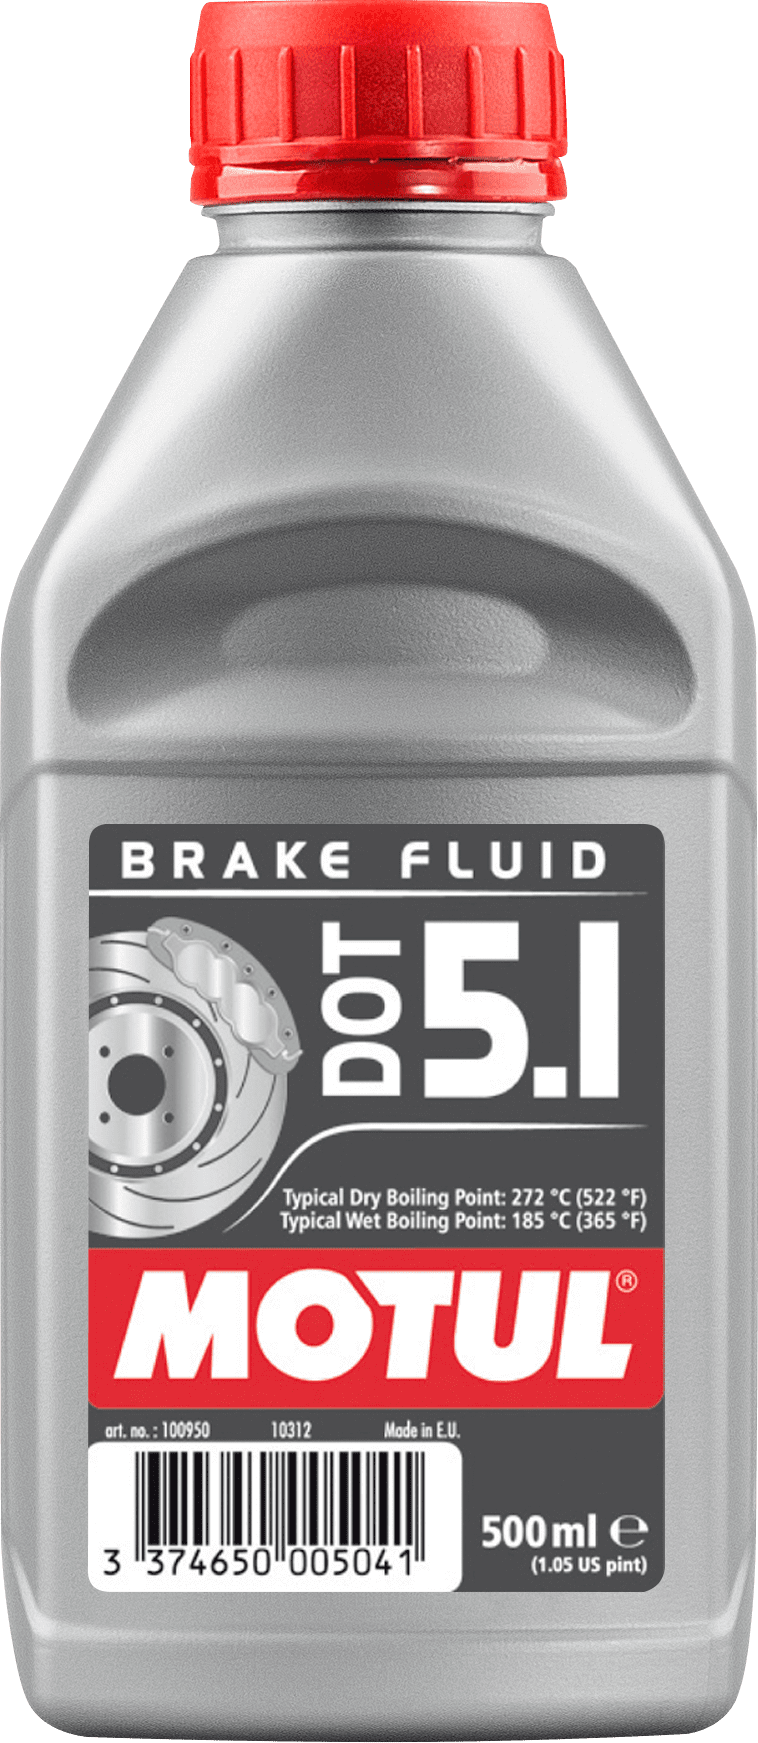 100950-500ML 100% Synthetic brake fluid on polyglycol basis for all types of hydraulic actuated brake and clutch systems in accordance with DOT 5.1, DOT 4 and DOT 3 manufacturers’ recommendations.